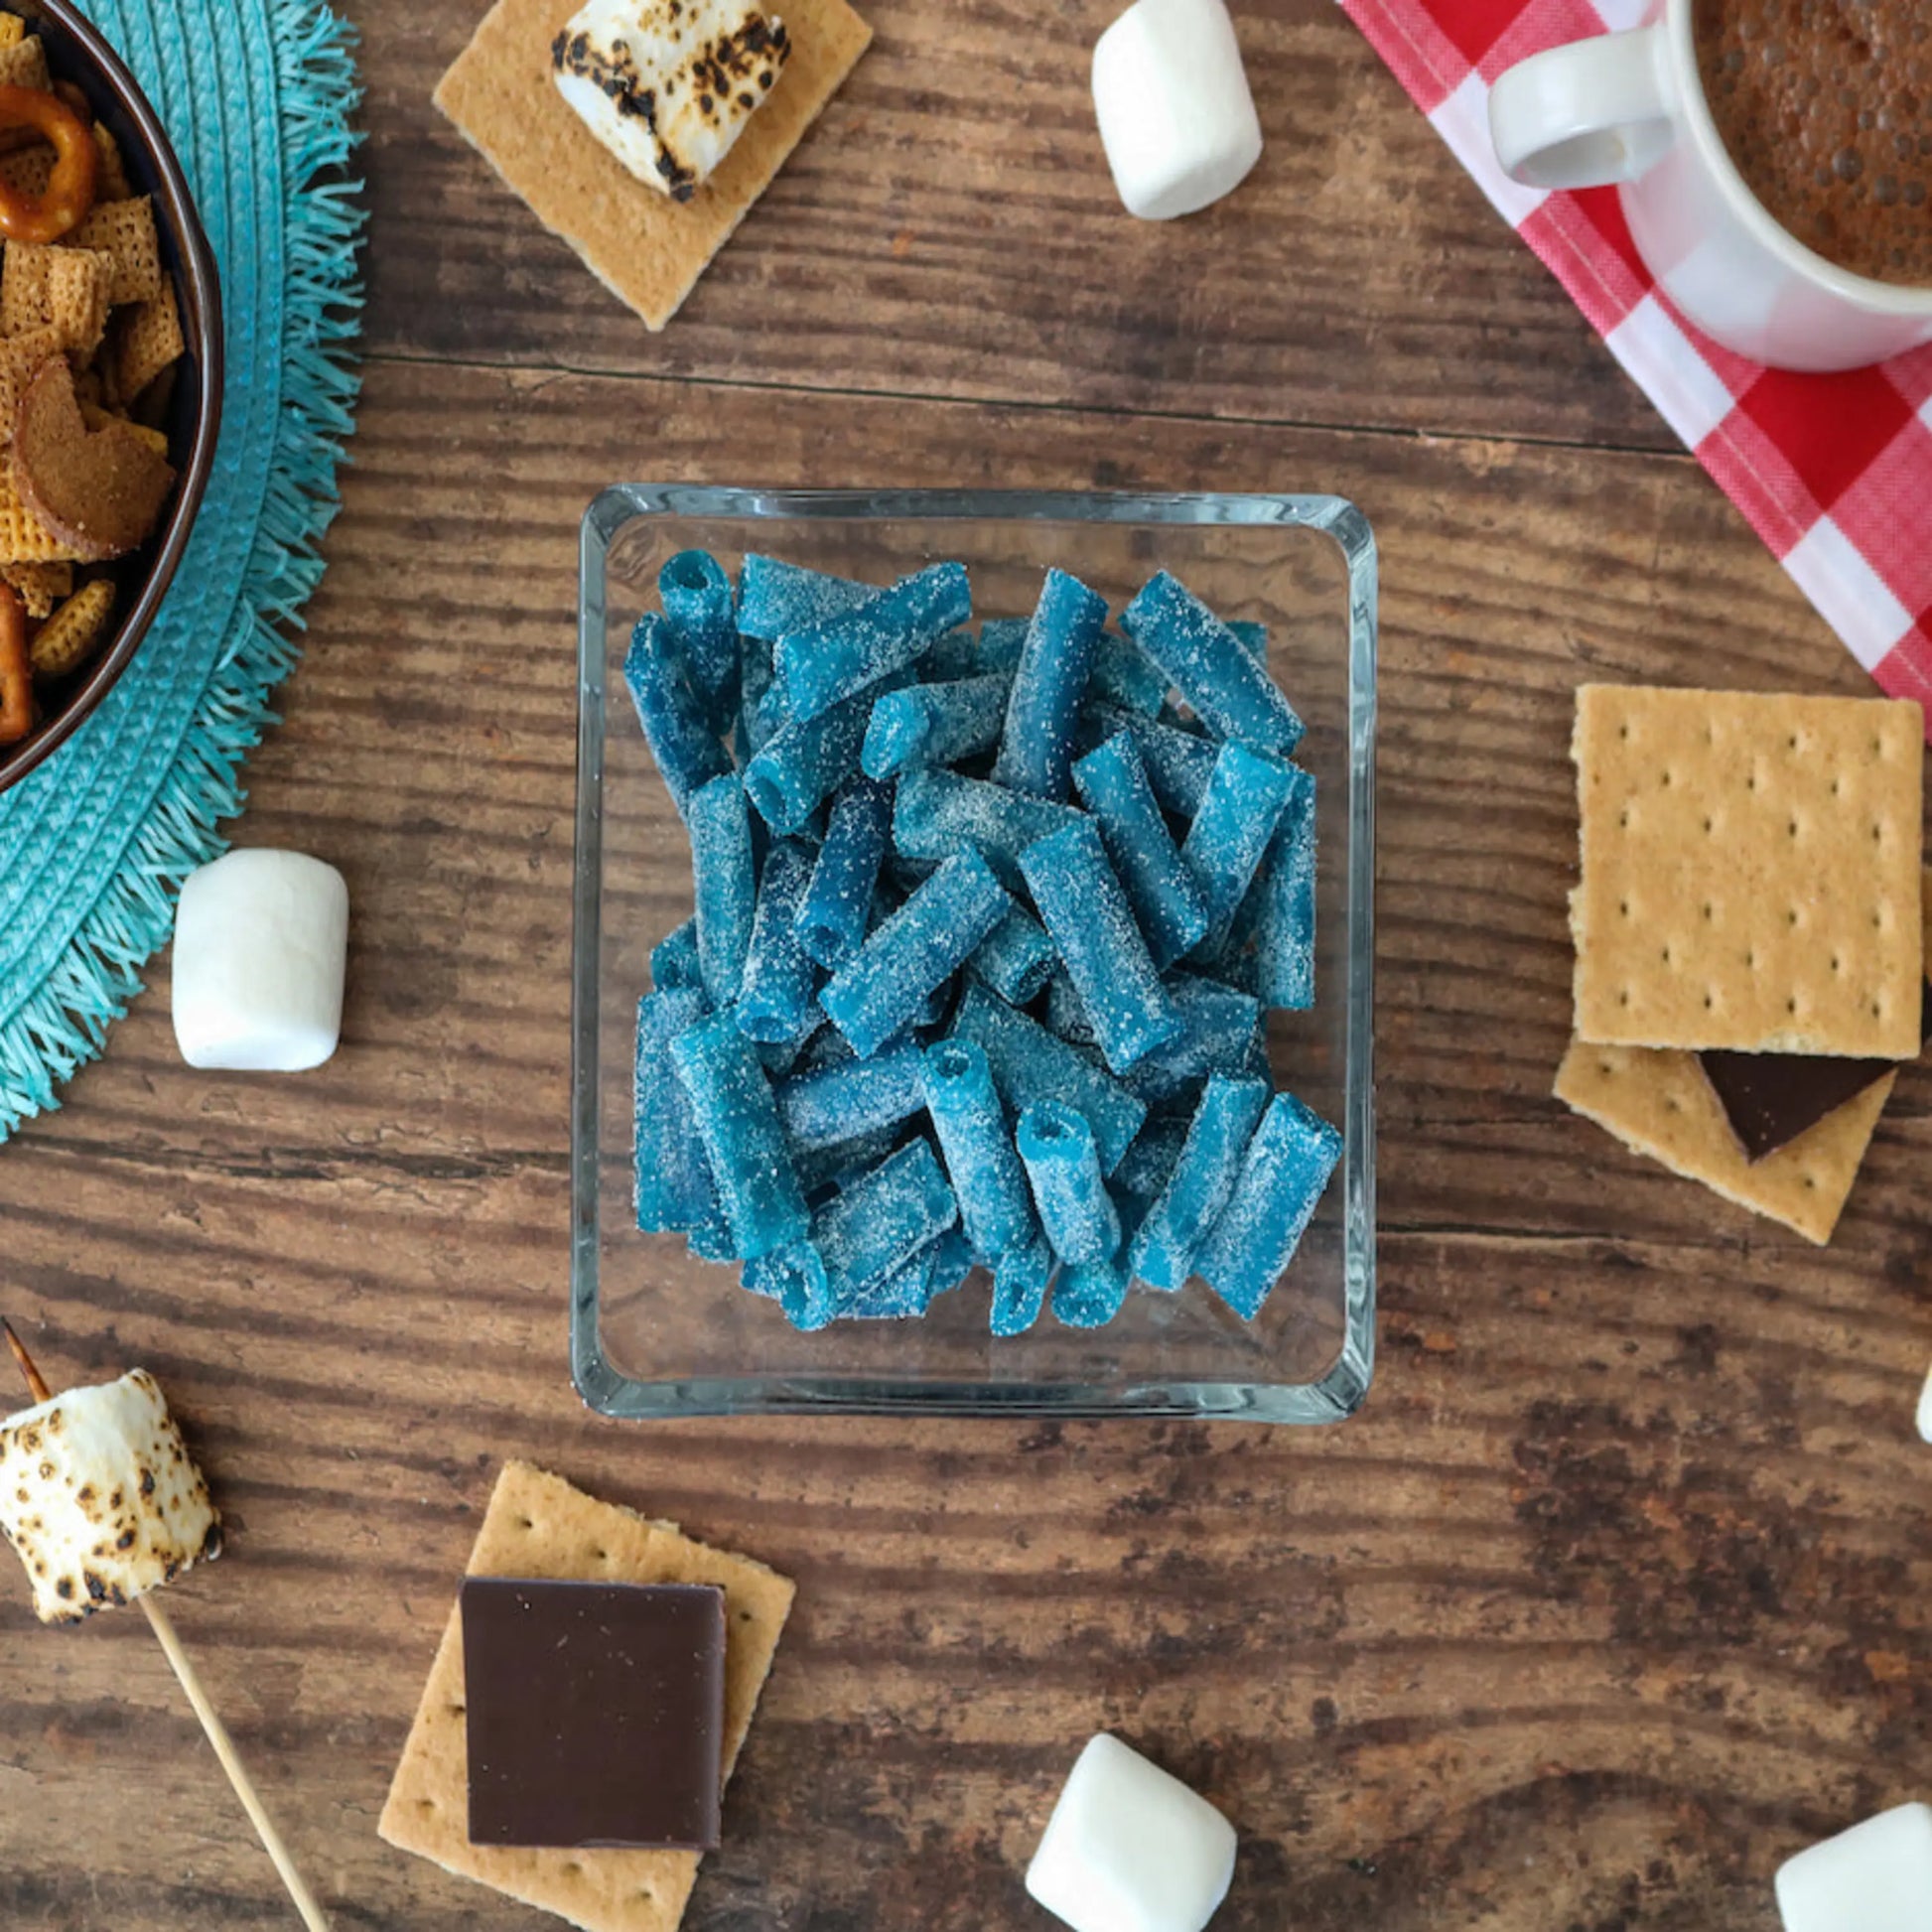 Sour Punch Bites Blue Raspberry Candy alongside s'mores supplies